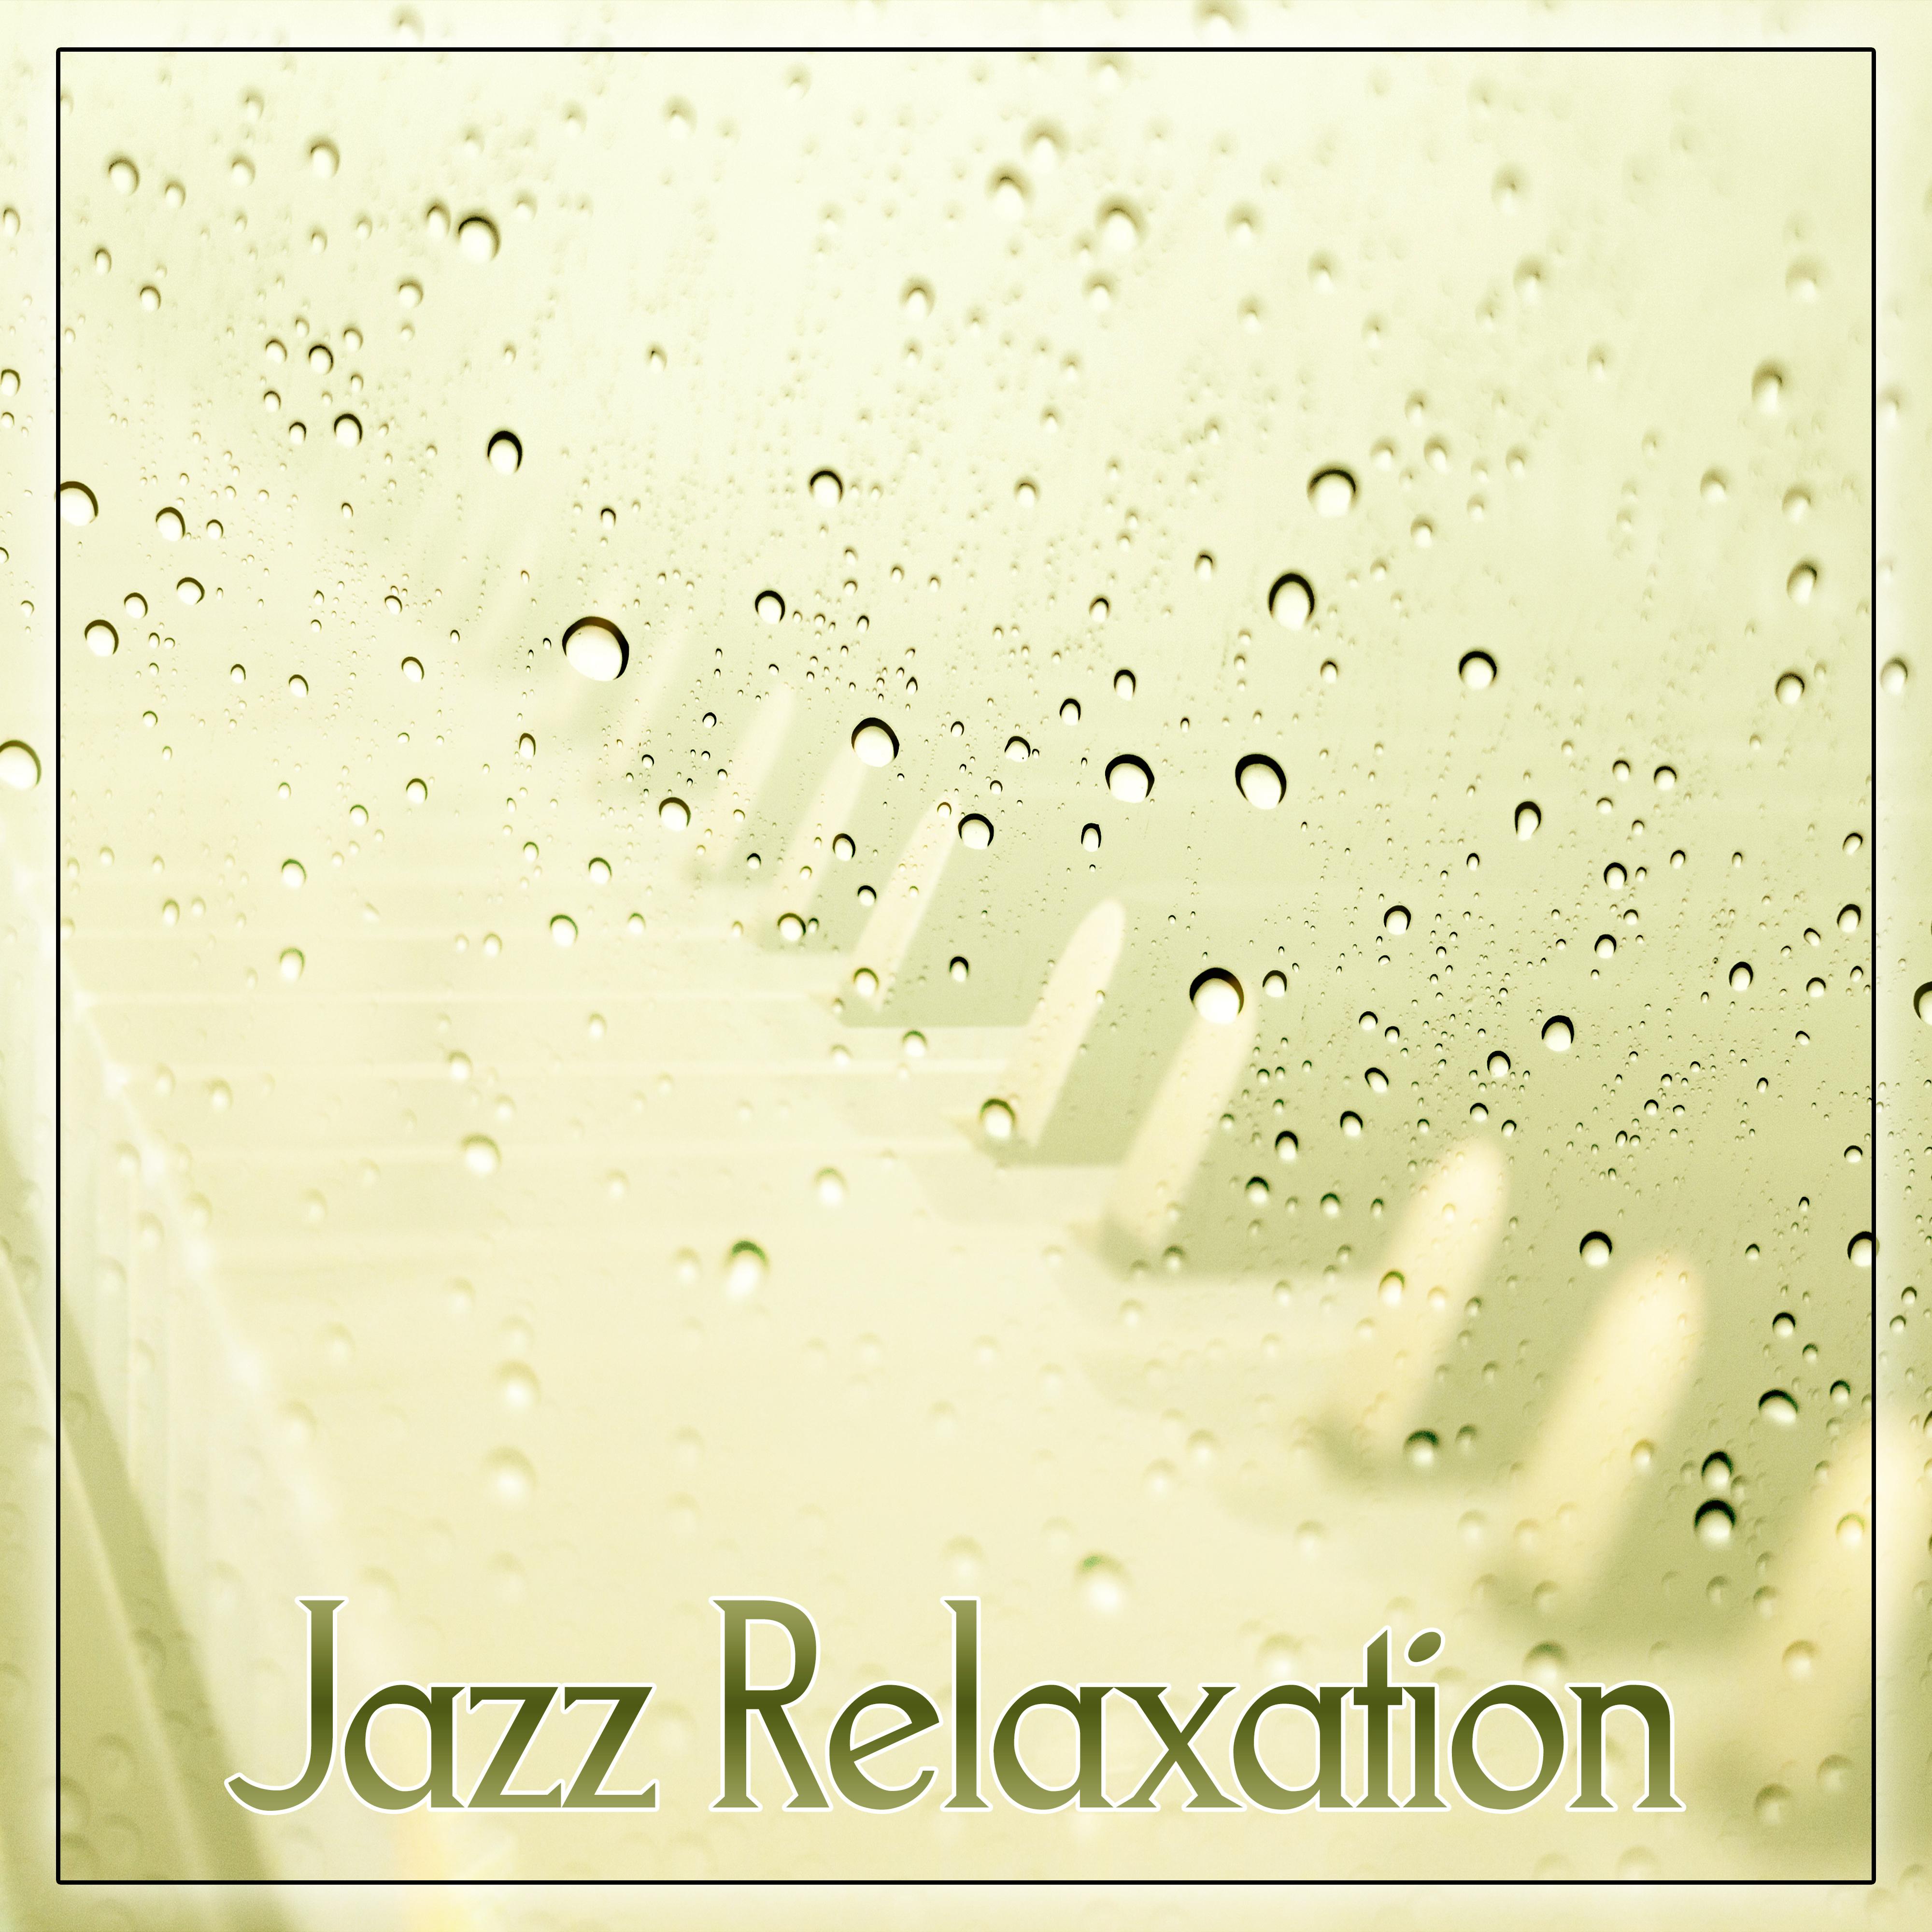 Jazz Relaxation – Best Summer Jazz for Relax Time, Melow and Smooth Jazz, Cafe Lounge, Background Music for Relaxation, Jazz Lounge